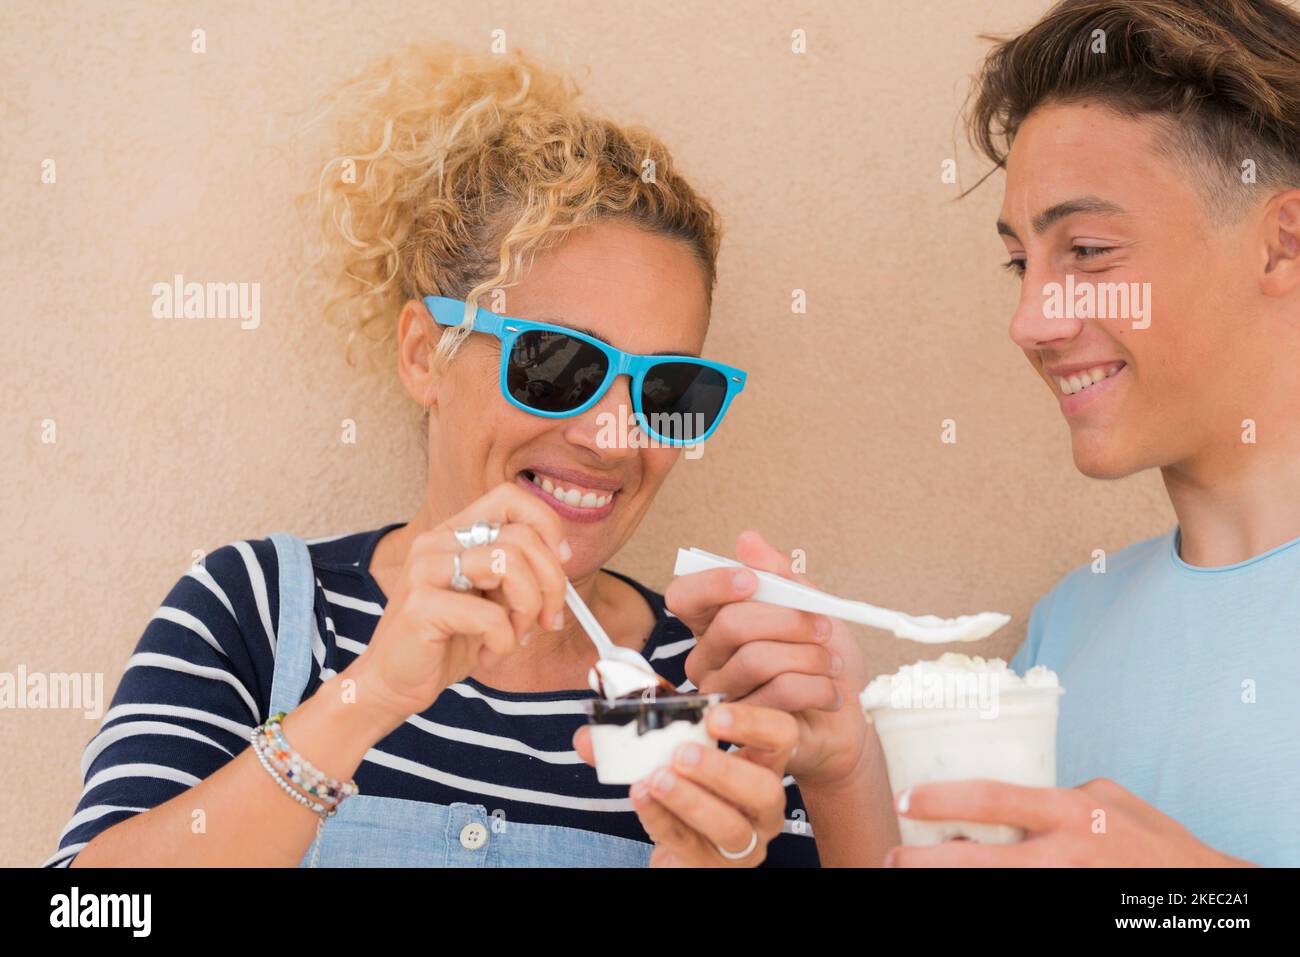 couple of two poeple they are son and mother eating milkshake and ice cream together smiling and having fun Stock Photo